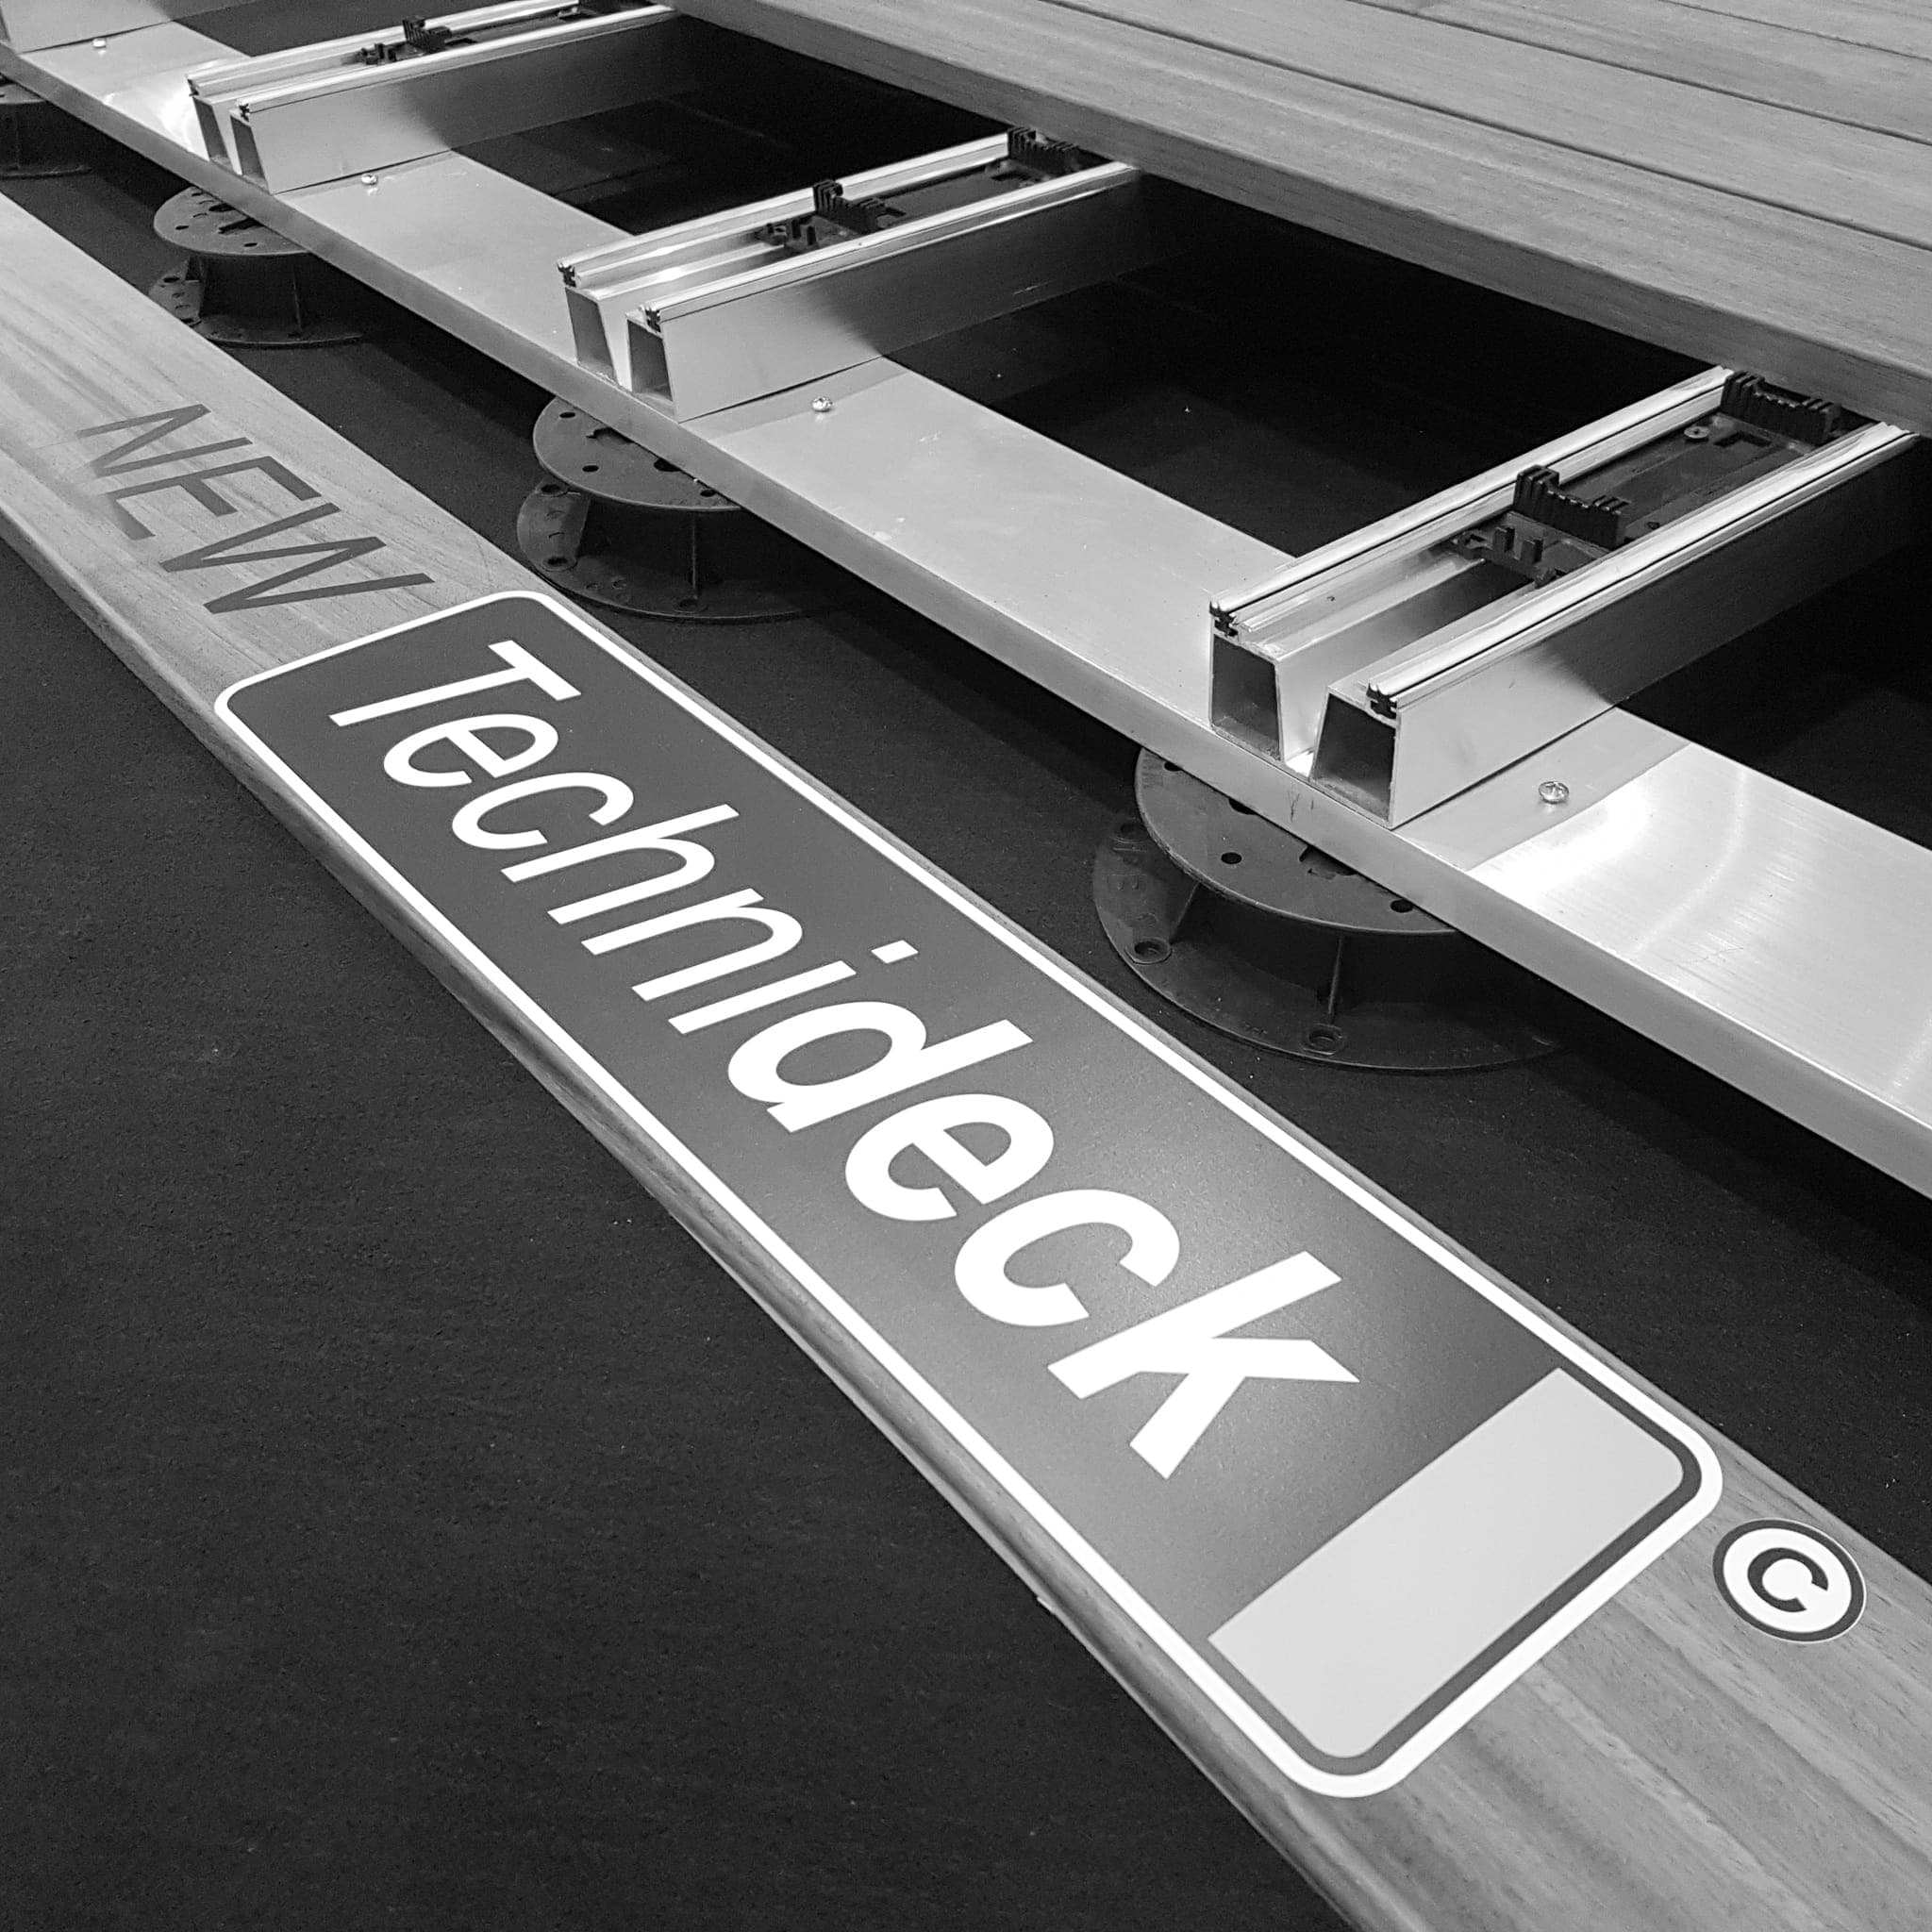 Vetedy launches its new prototype of technideck in 2020 a premium wood decking systems on an aluminium structure